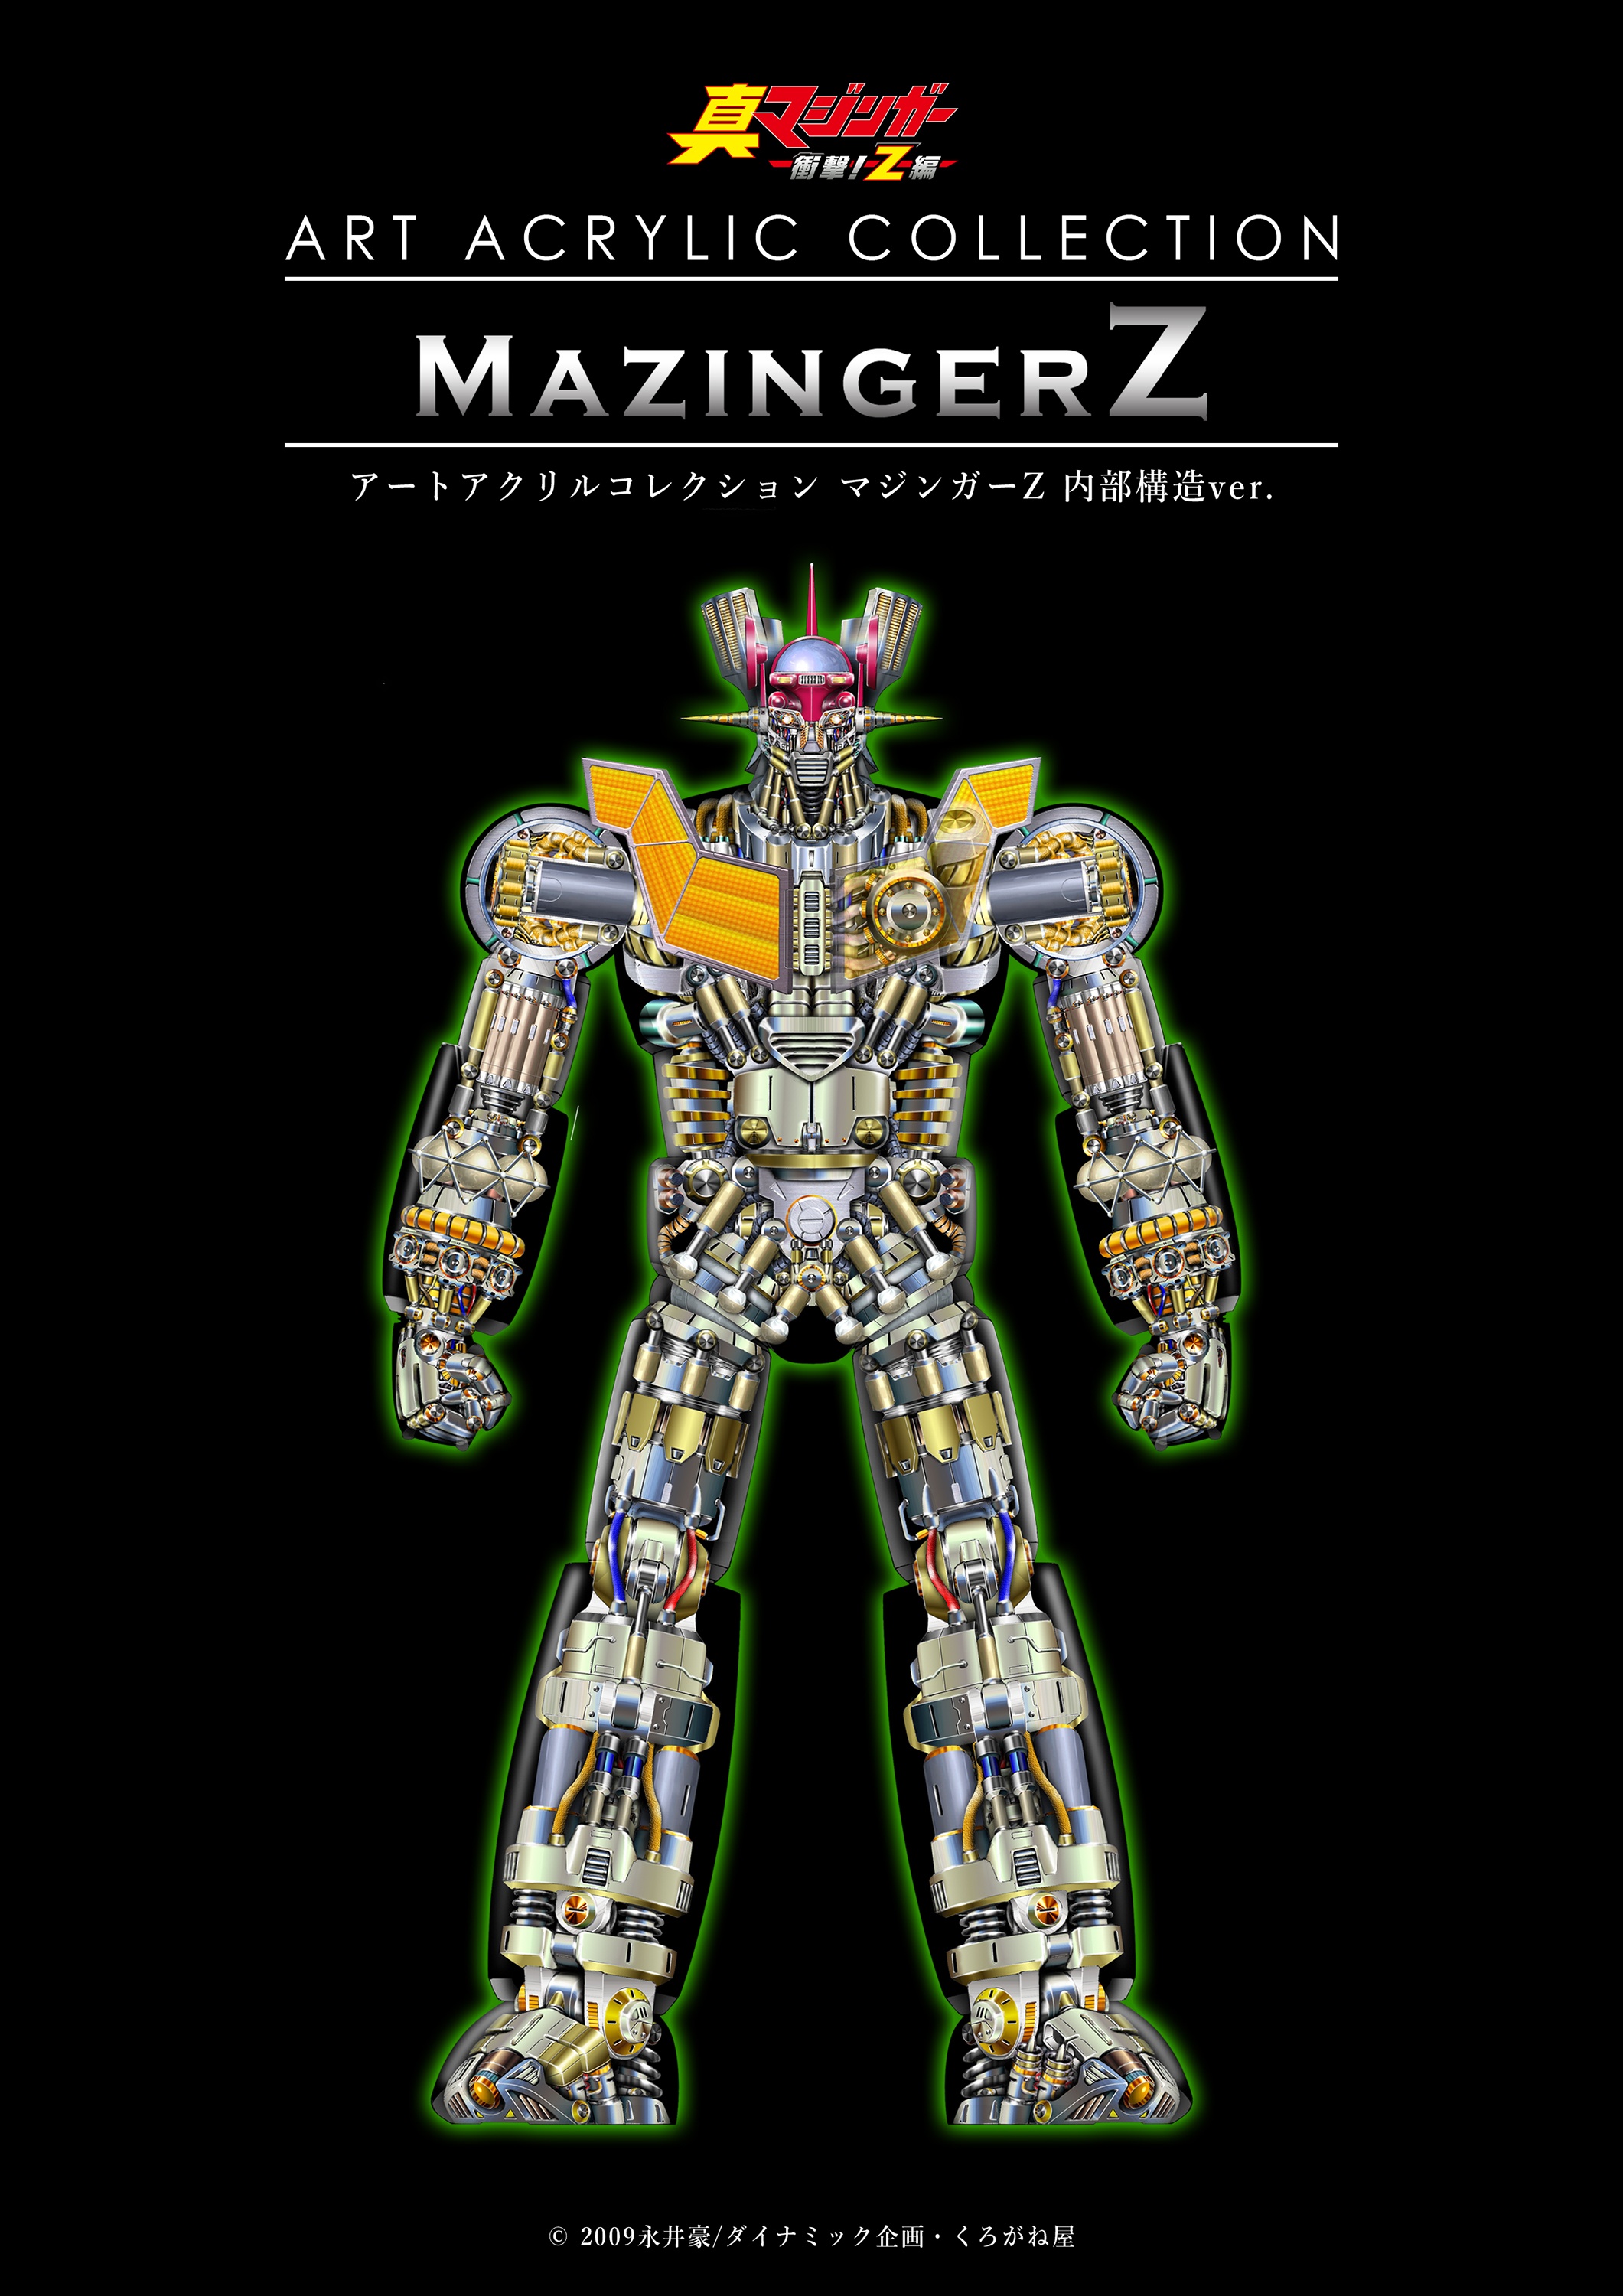 Mazinger Edition Z: The Impact!: Acrylic Art Collection Mazinger Z 